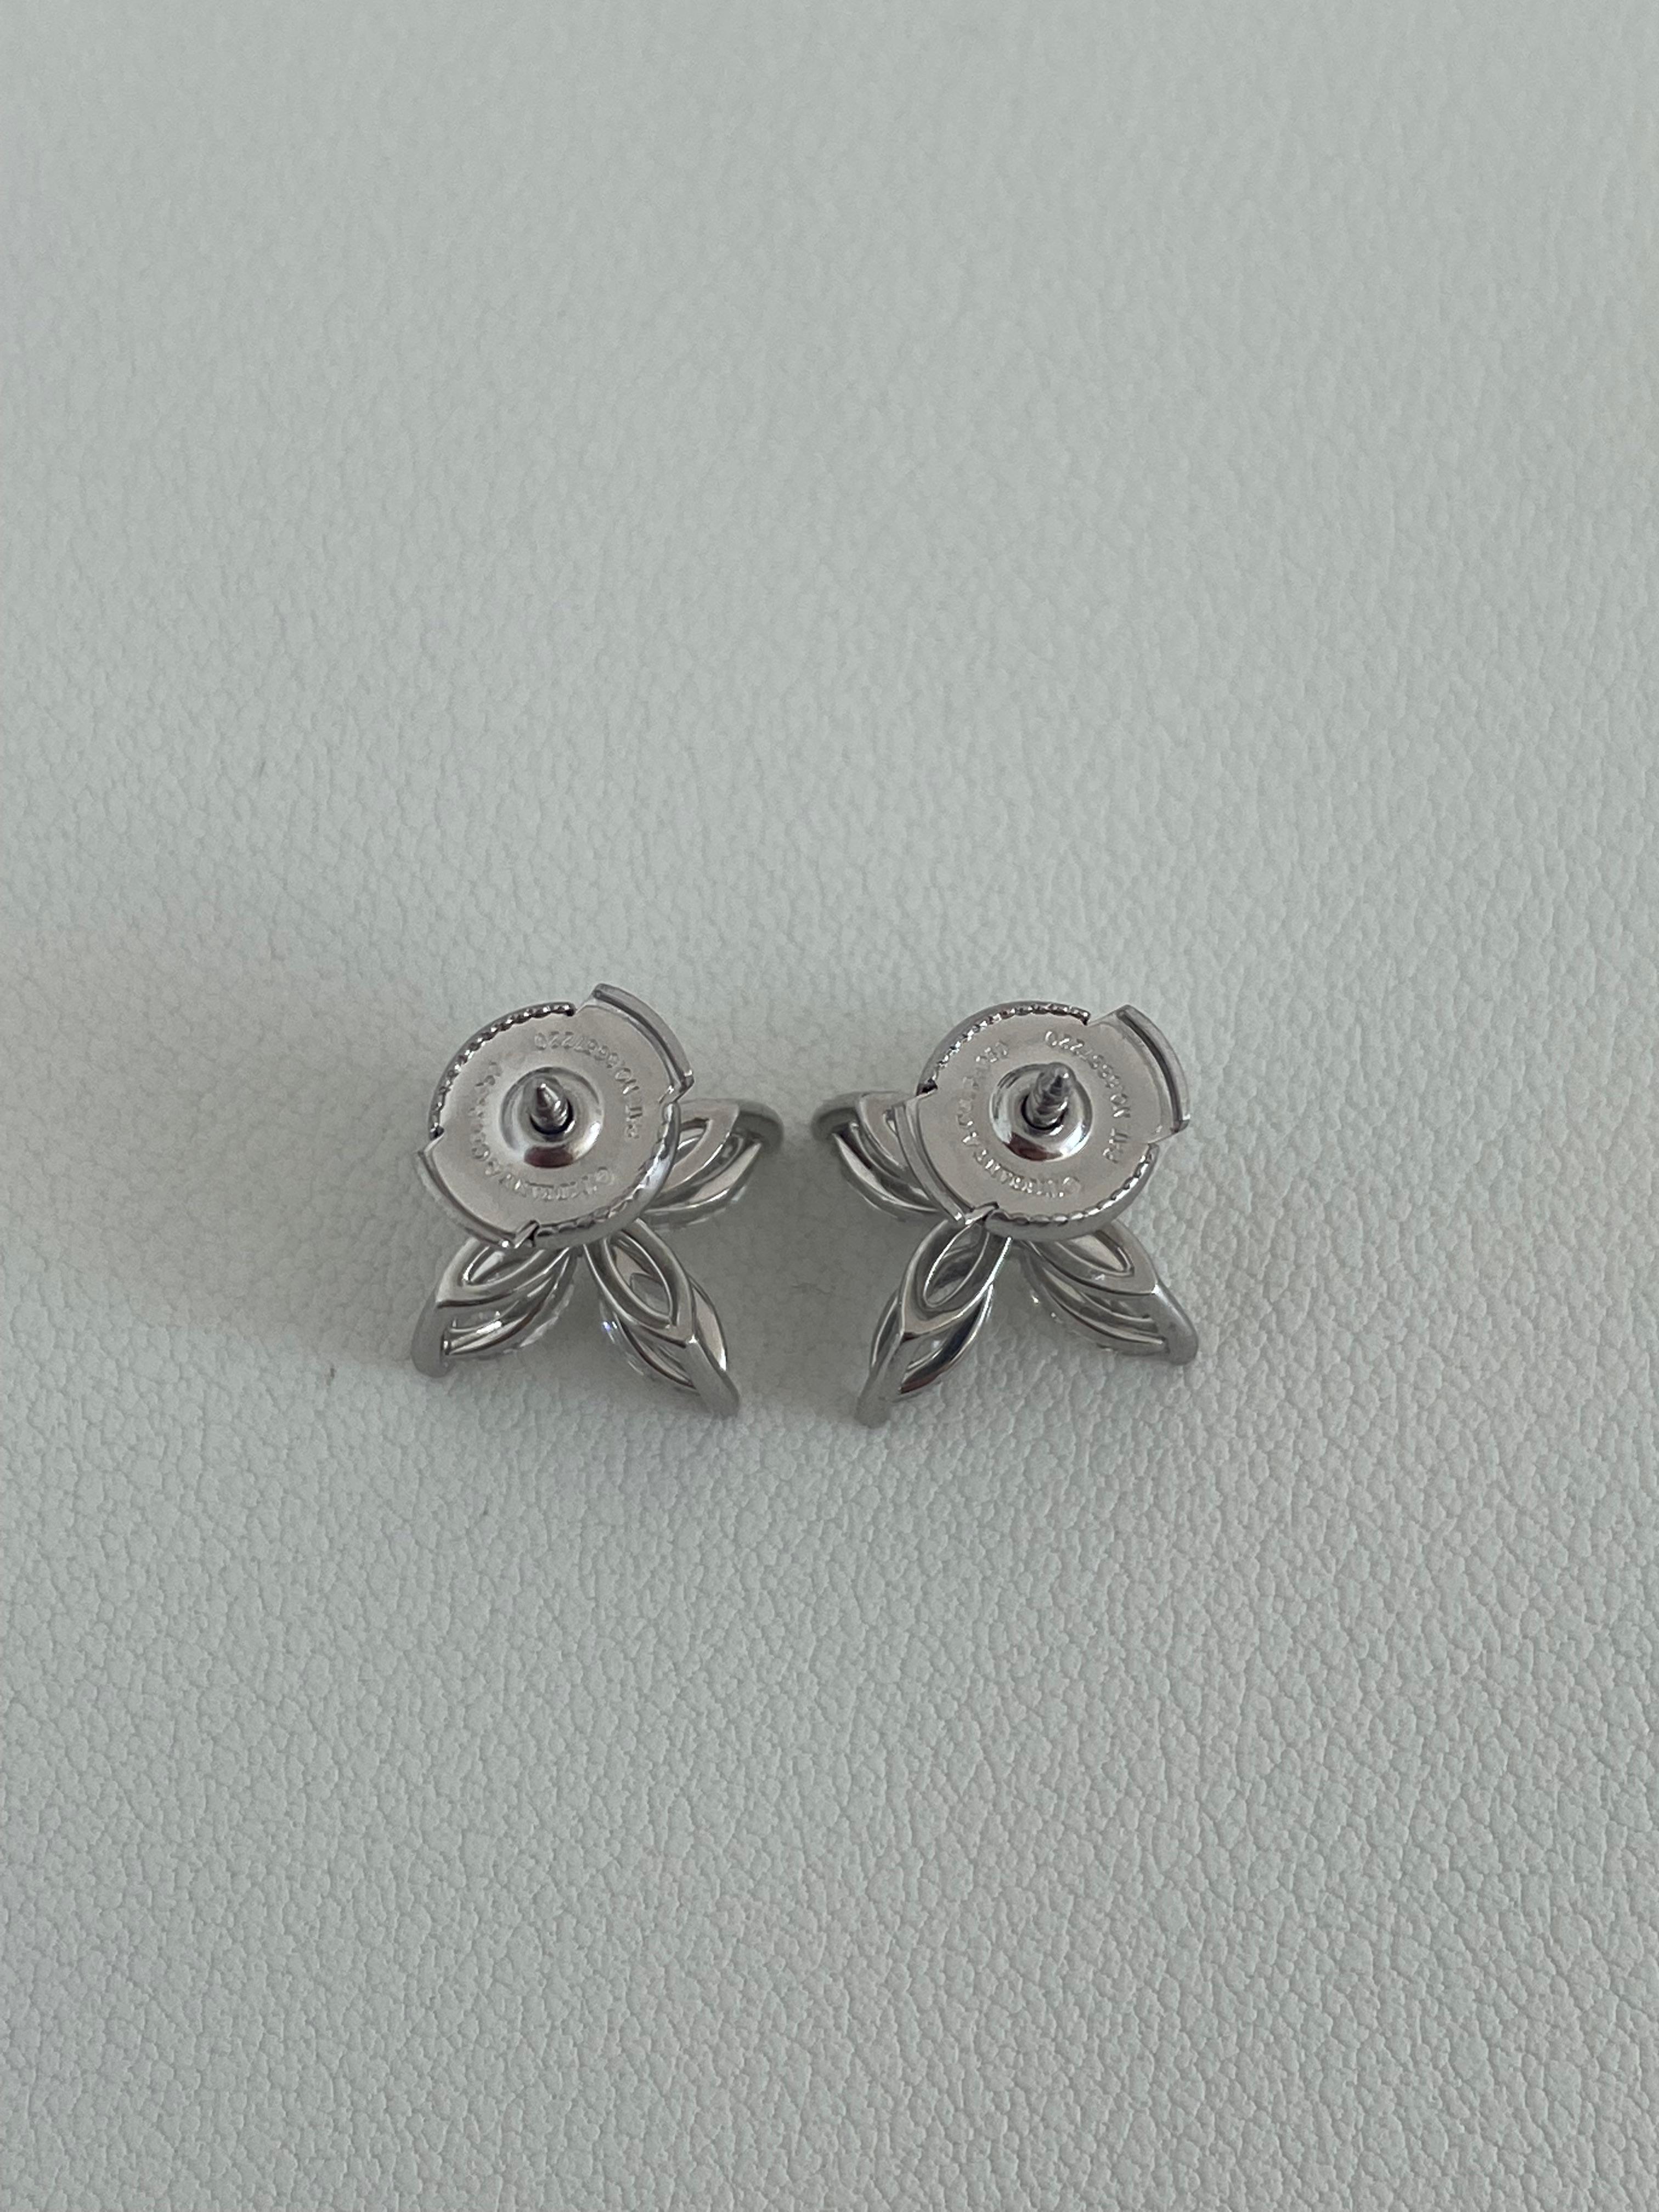 Tiffany Co Victoria platinum with diamonds mini studs earrings  In Excellent Condition For Sale In New York, NY